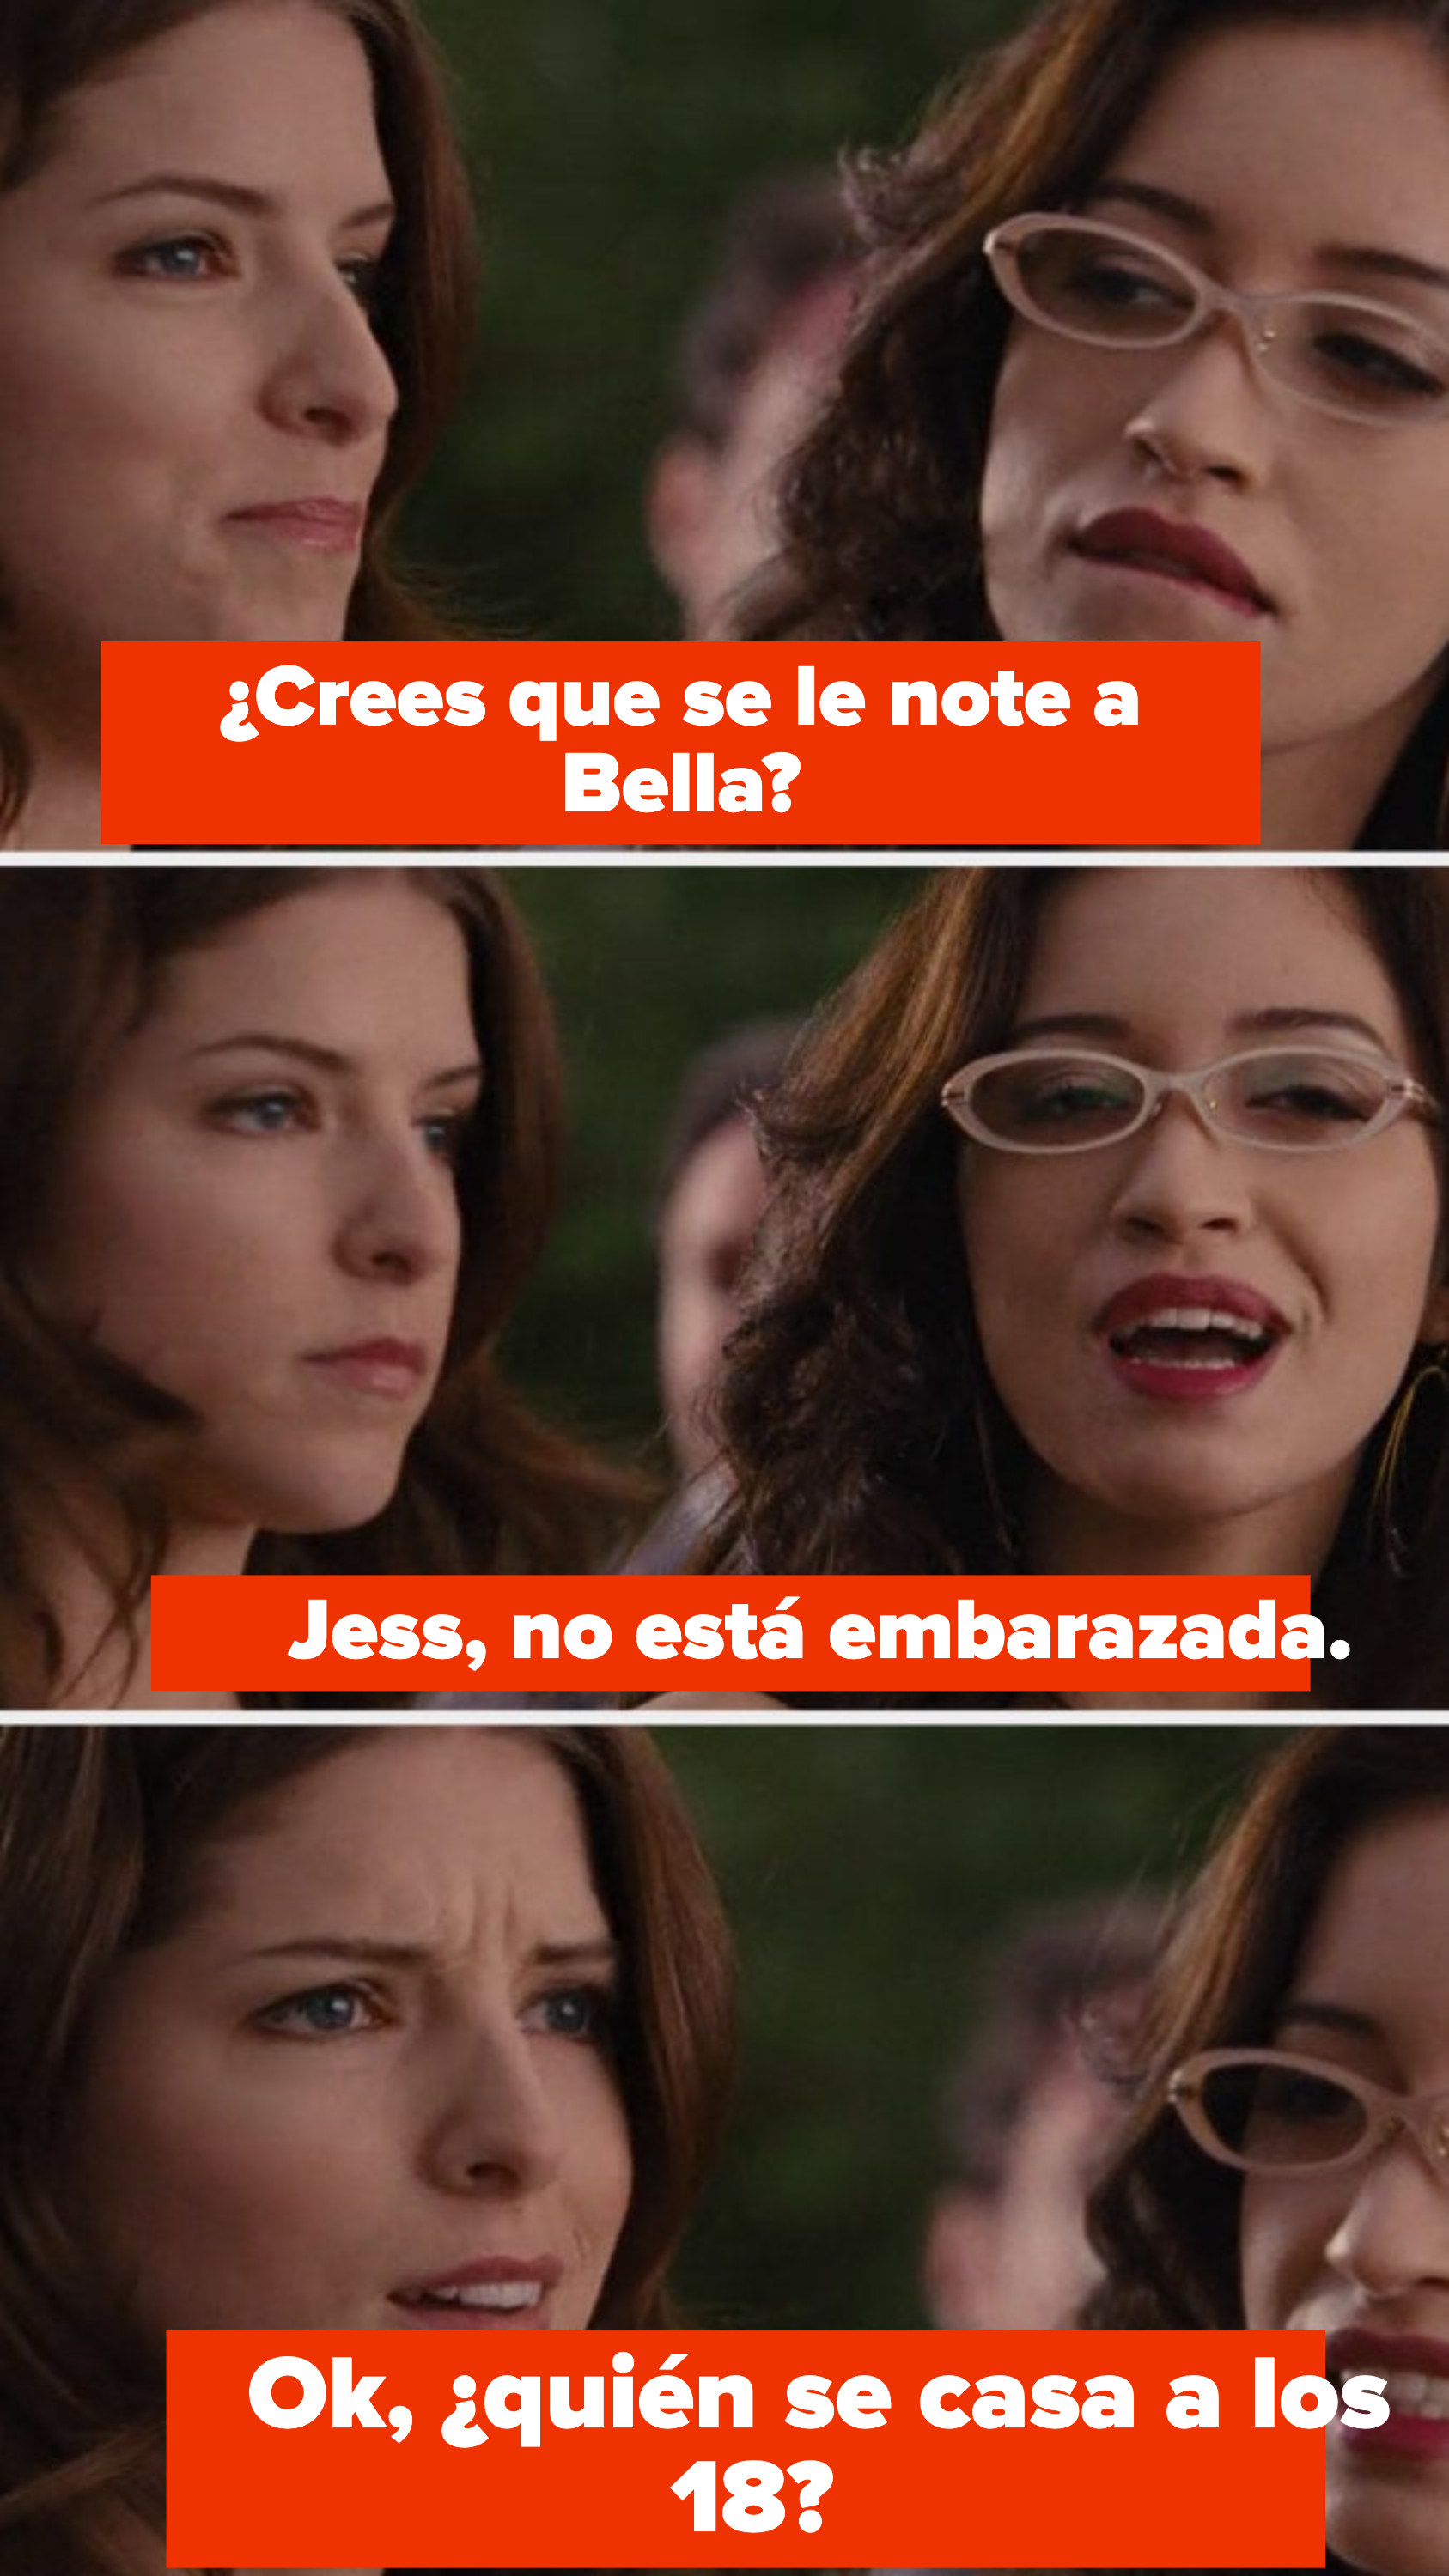 Jess says Bella must be pregnant. &quot;Who else gets married at 18?&quot;